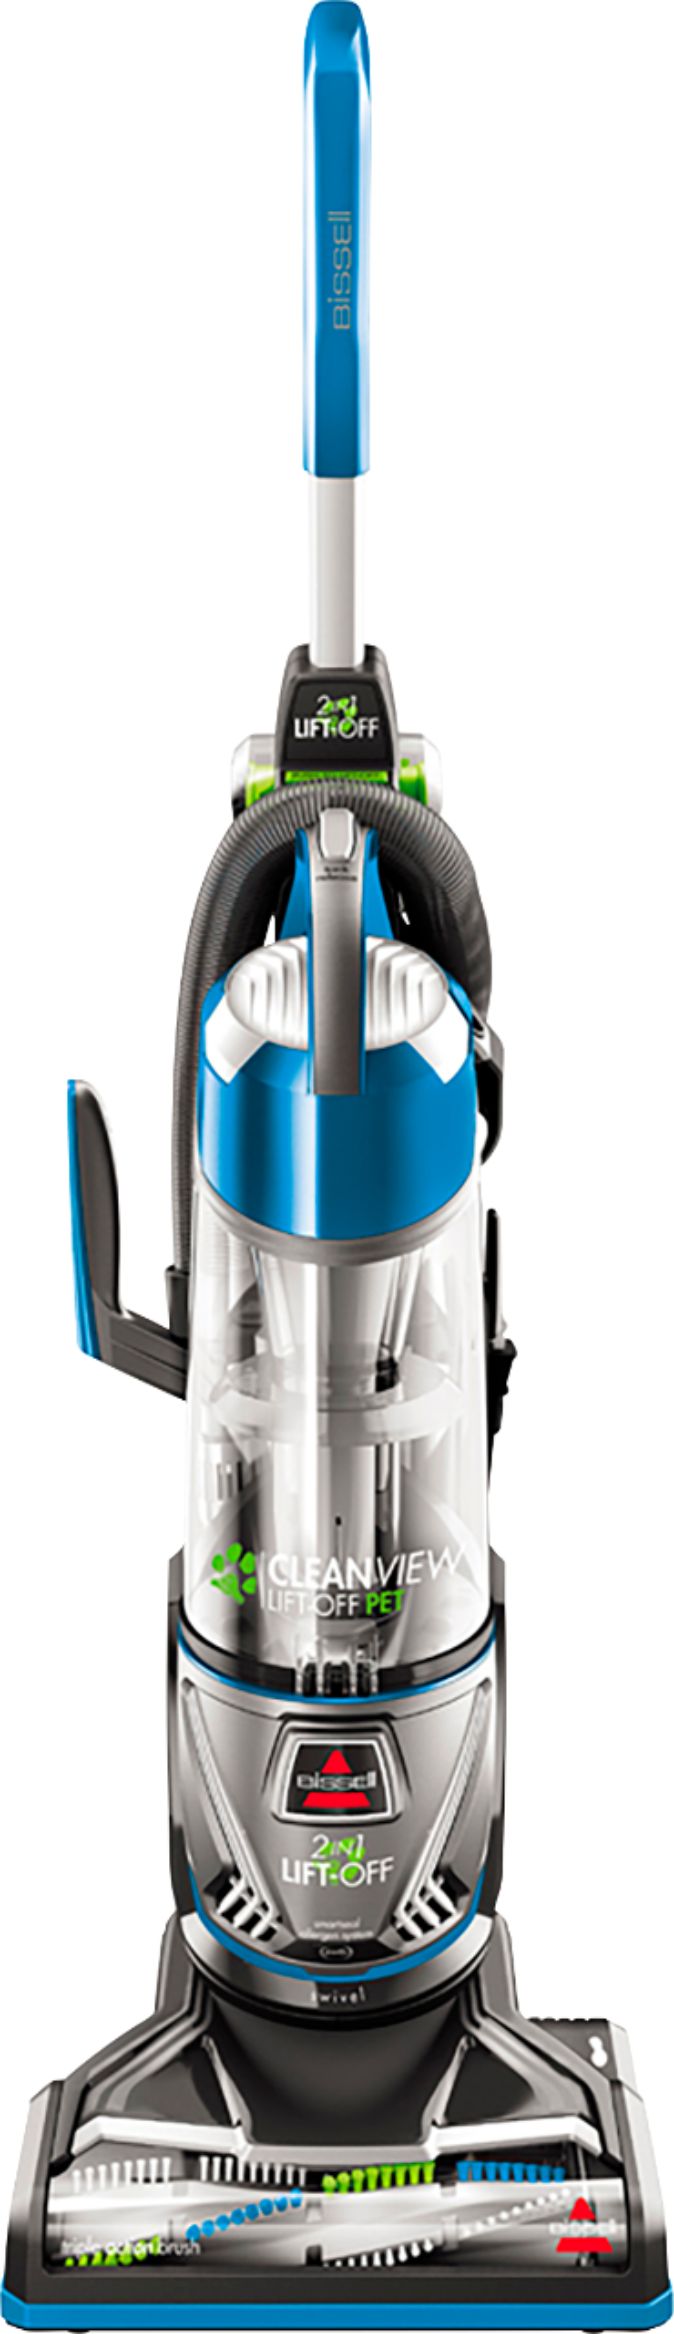 BISSELL - CleanView Lift-Off Pet Upright Vacuum - Bossanova Blue With Black Accents